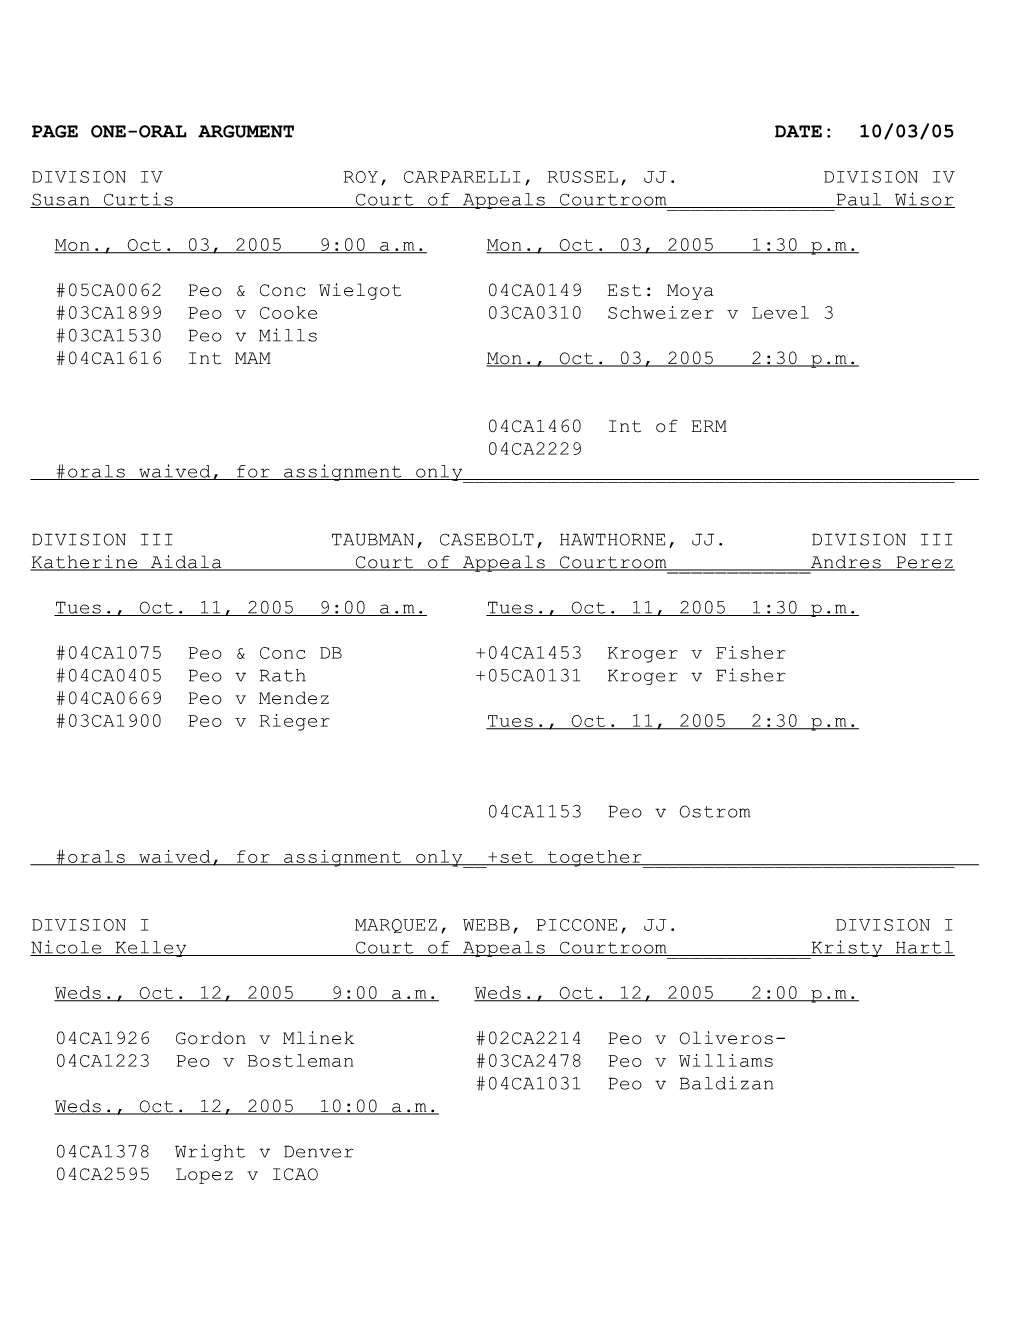 Page One-Oral Argument Date: 10/03/05